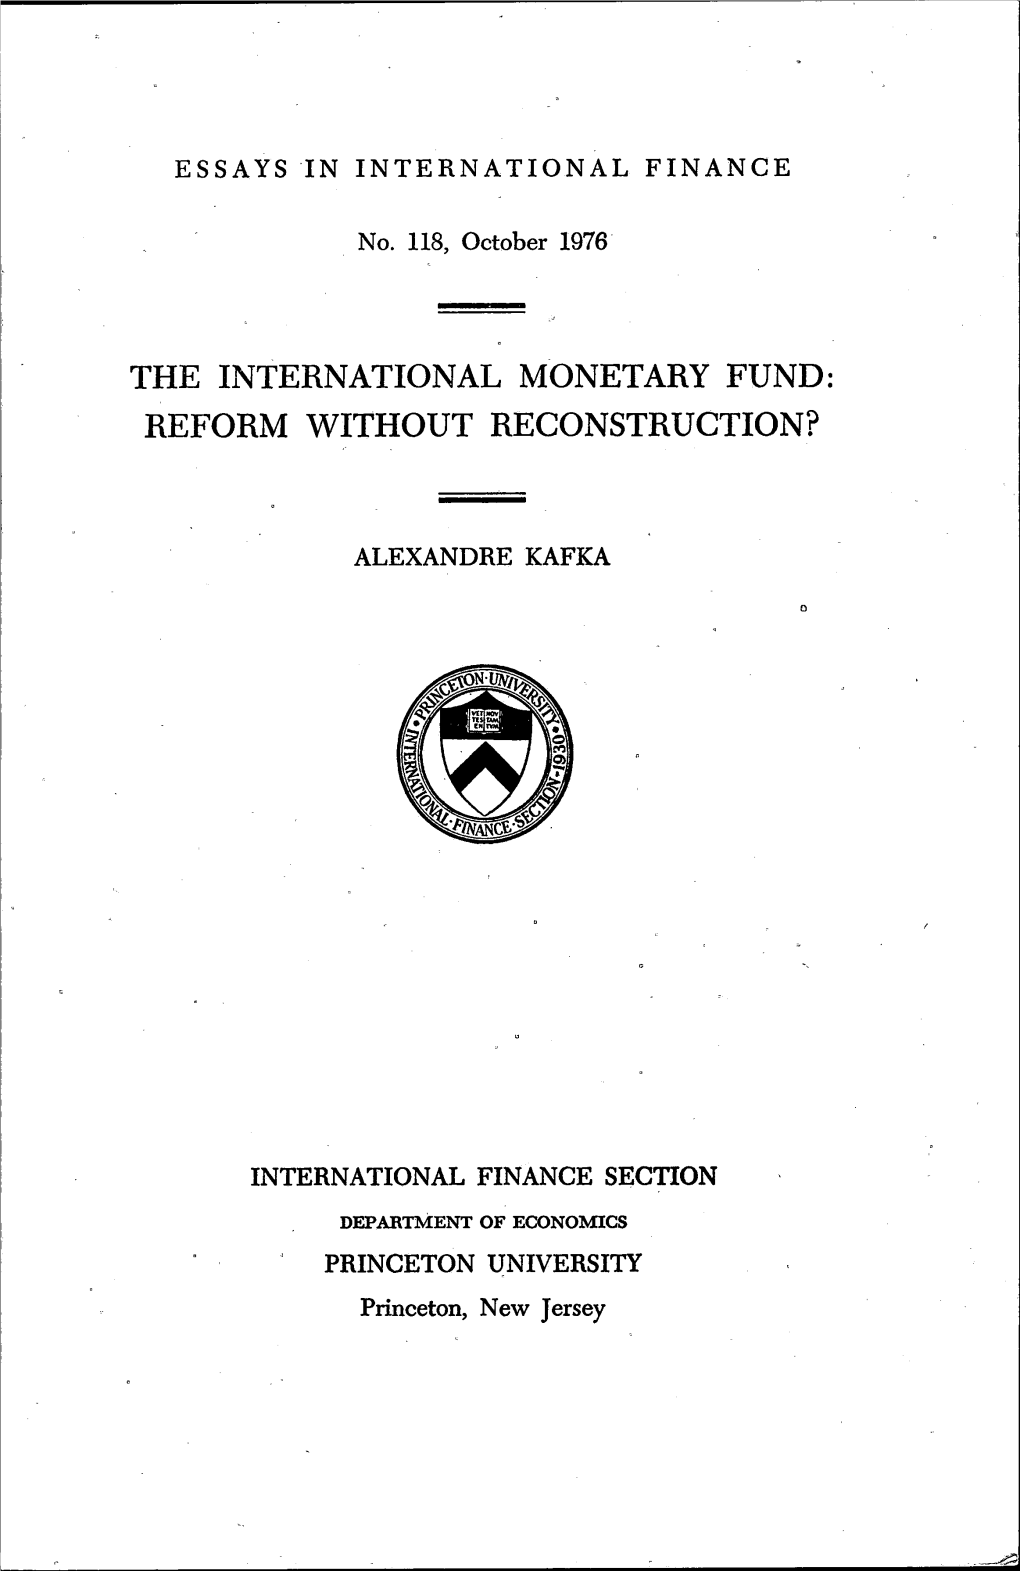 The International Monetary Fund: Reform Without Reconstruction?